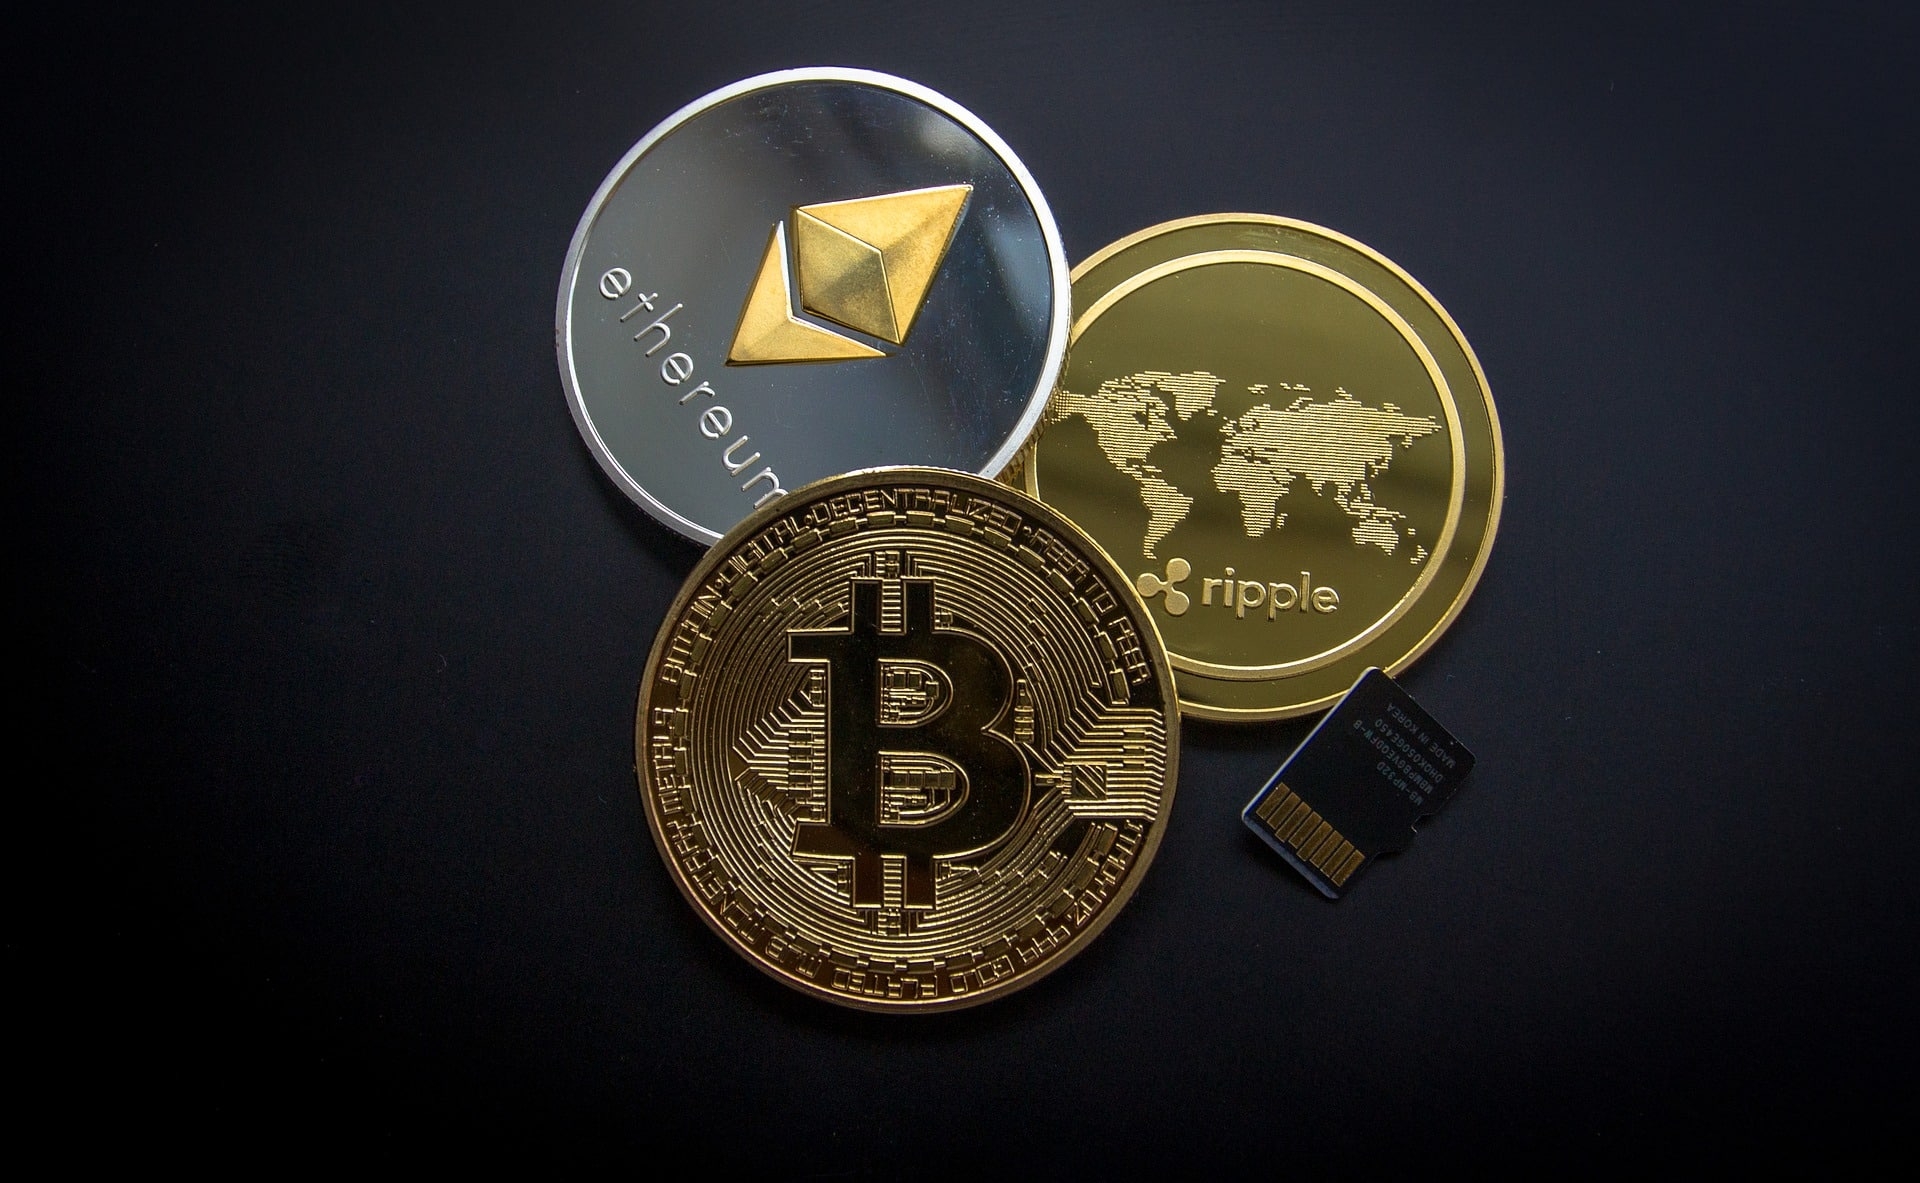 Cryptocurrencies' market cap declined to $1.26 trillion from its peak of $3 trillion it hit in November 2021, decline of 58 percent.